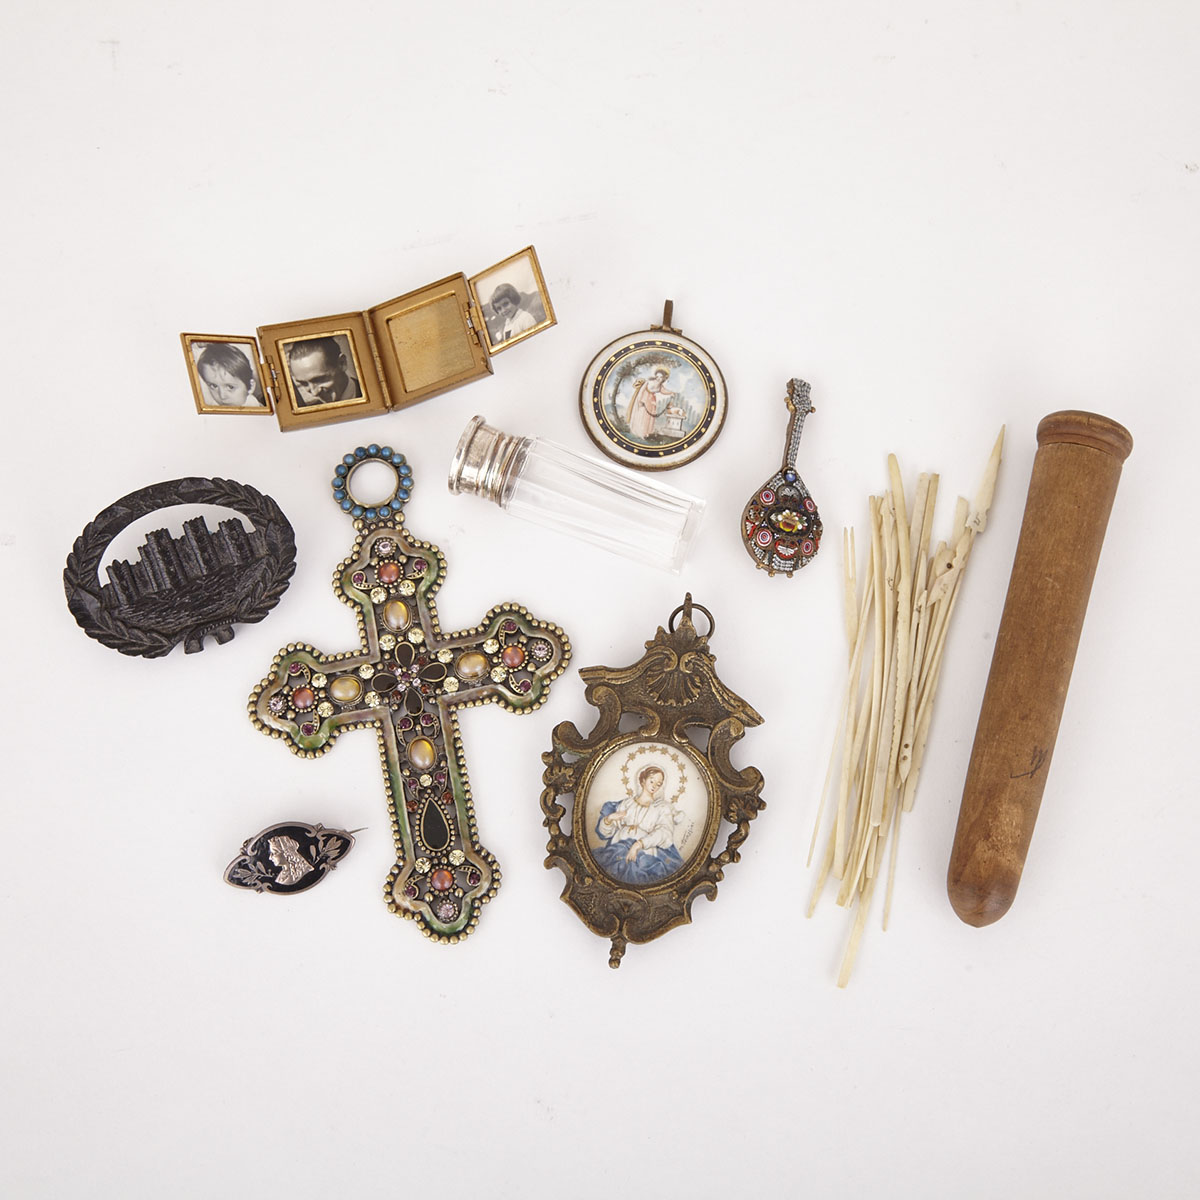 Miscellaneous Group of Jewellery and Decorative Items, 19th and 20th centuries